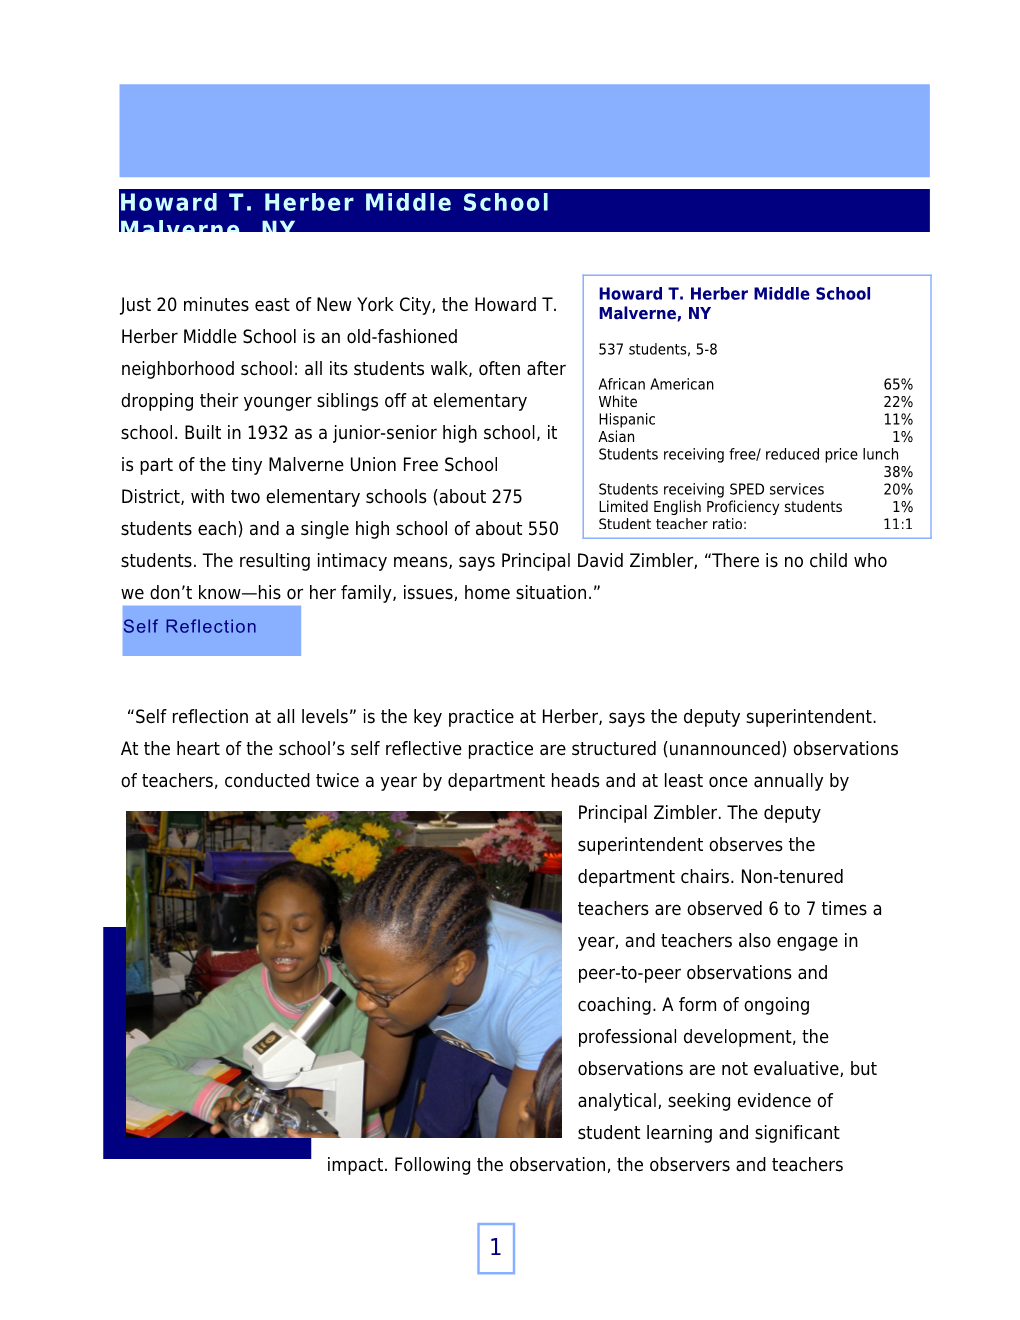 Howard T. Herber Middle School, Malverne, New York Learning from Six High Poverty, High